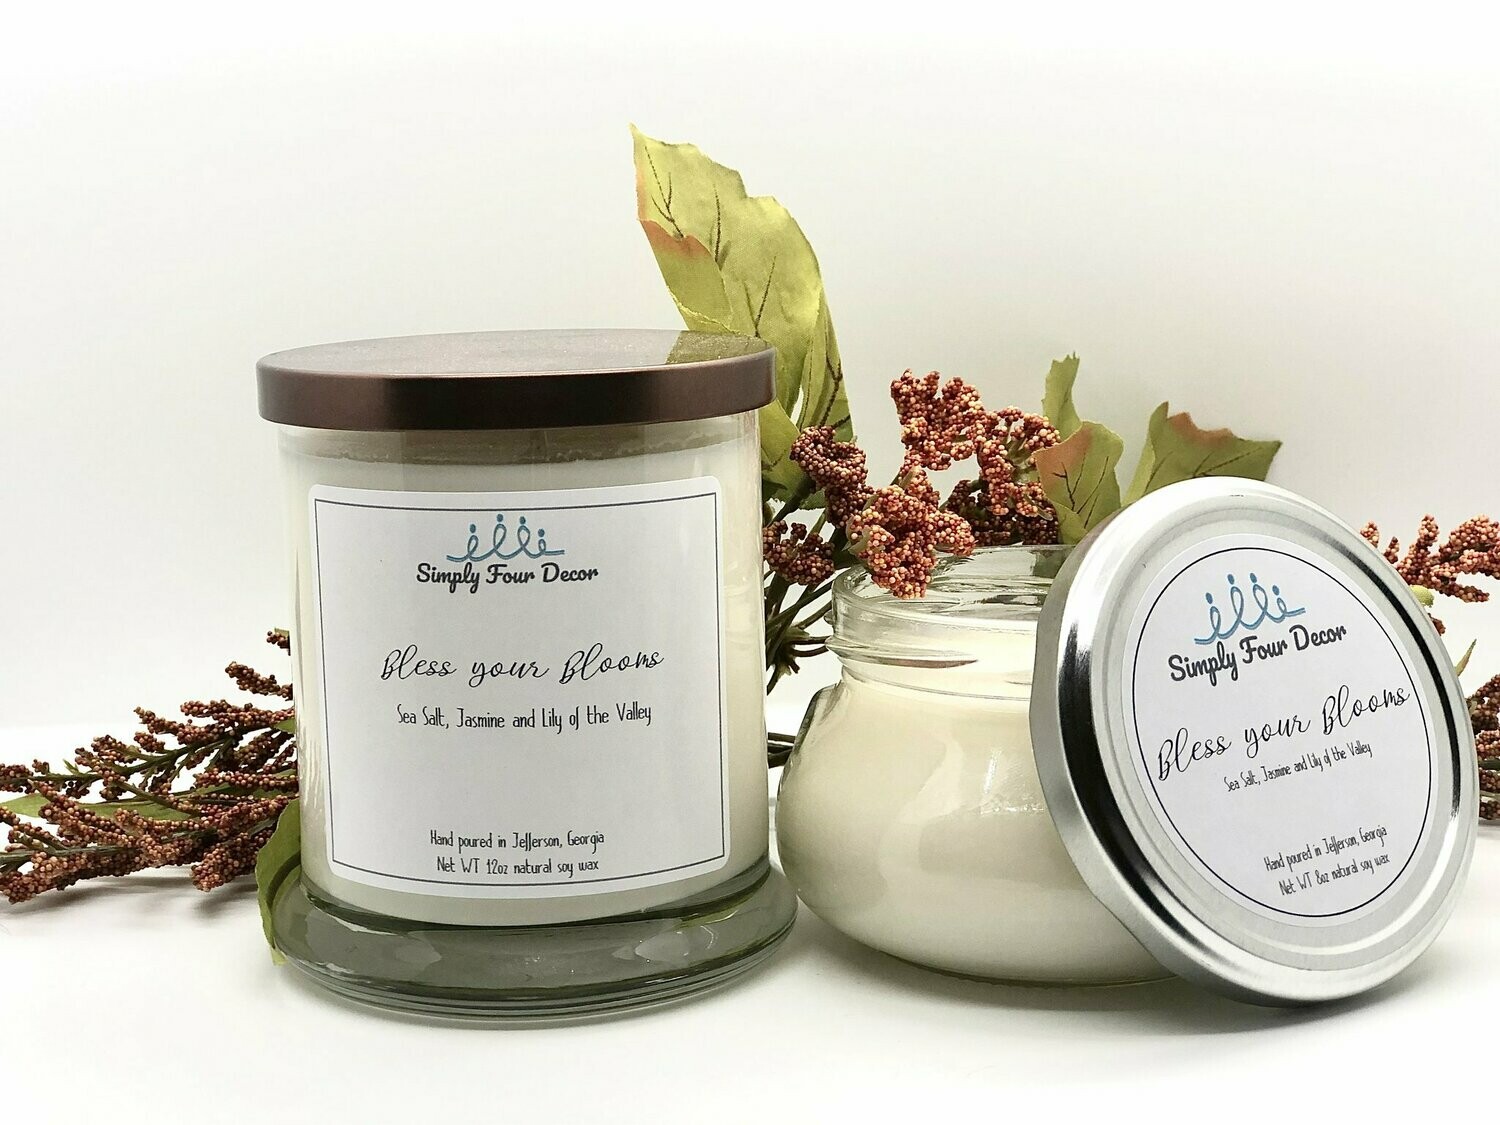 8oz Bless Your Blooms Candle